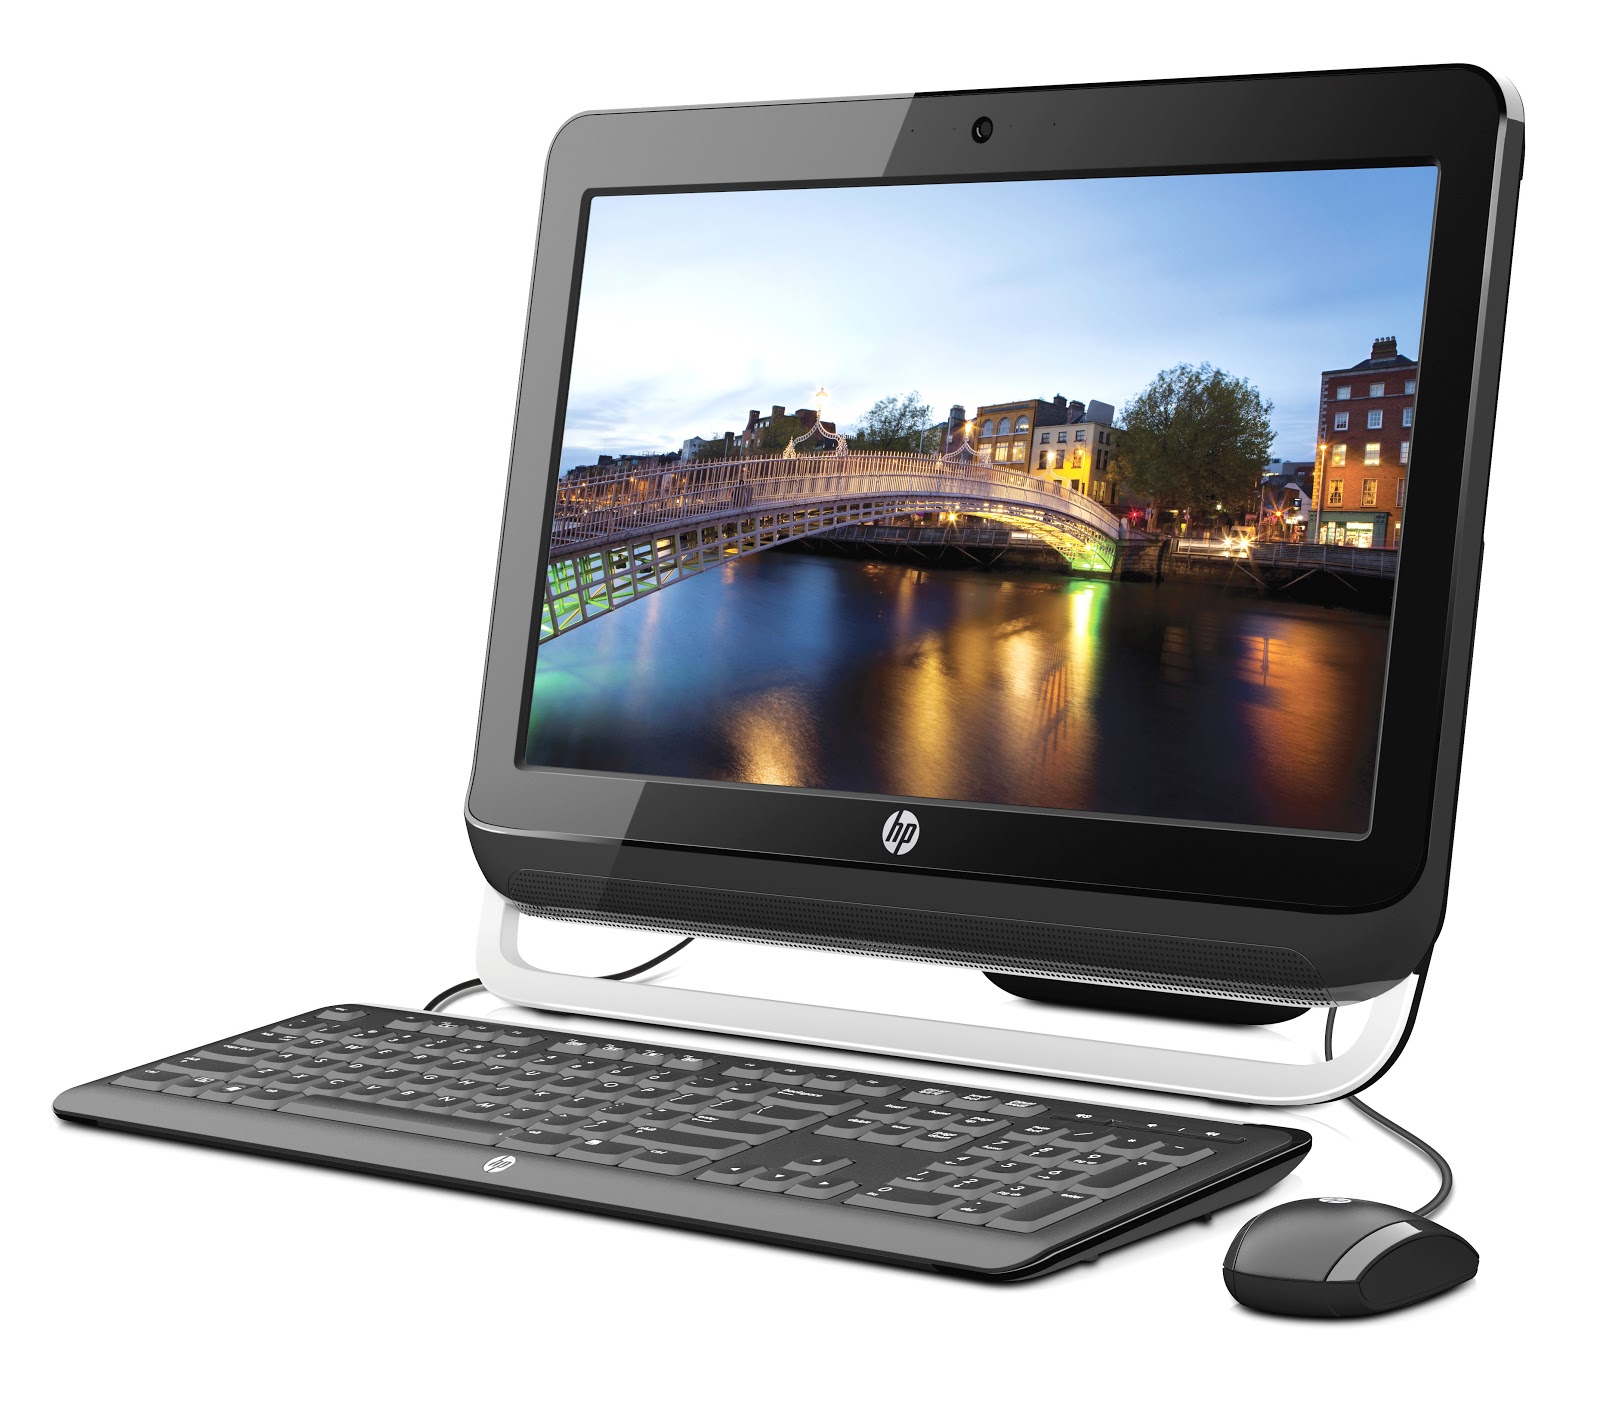  HP All in One desktops Unleashing the joys of being a 